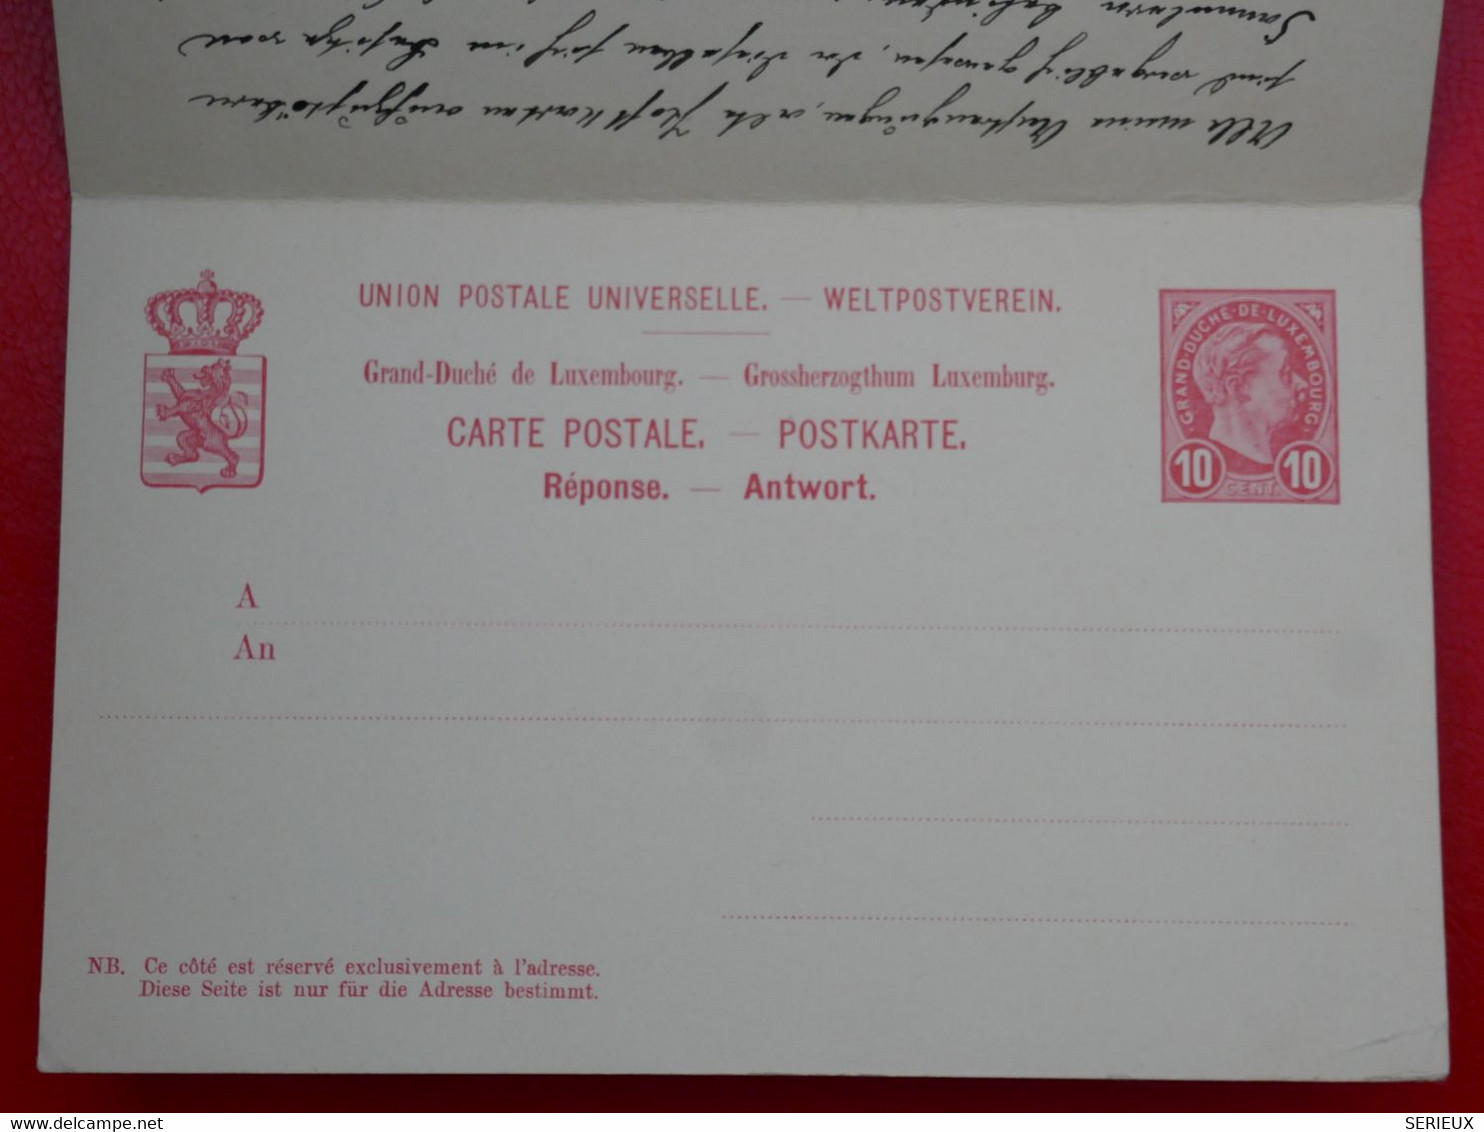 BI 9 LUXEMBOURG  BELLE  CARTE  DOUBLE 1900 POUR STRASBOURG  FRANCE  +AFFRANC. INTERESSANT++. - Stamped Stationery